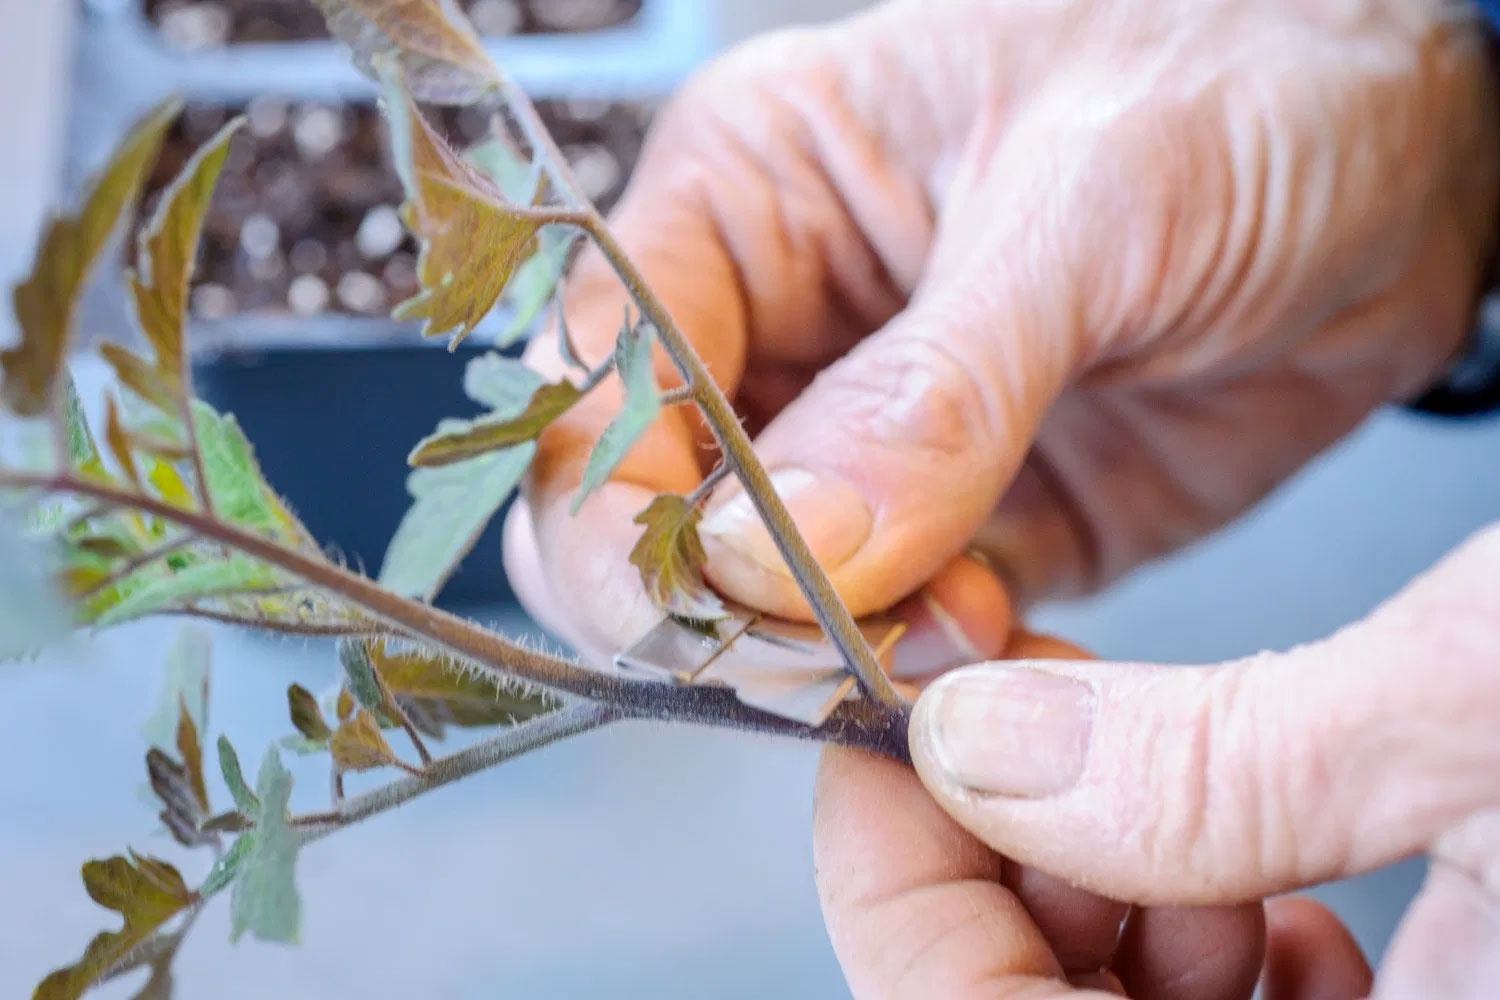 PHOTO: Removing the leaves from the tomato scion graft.